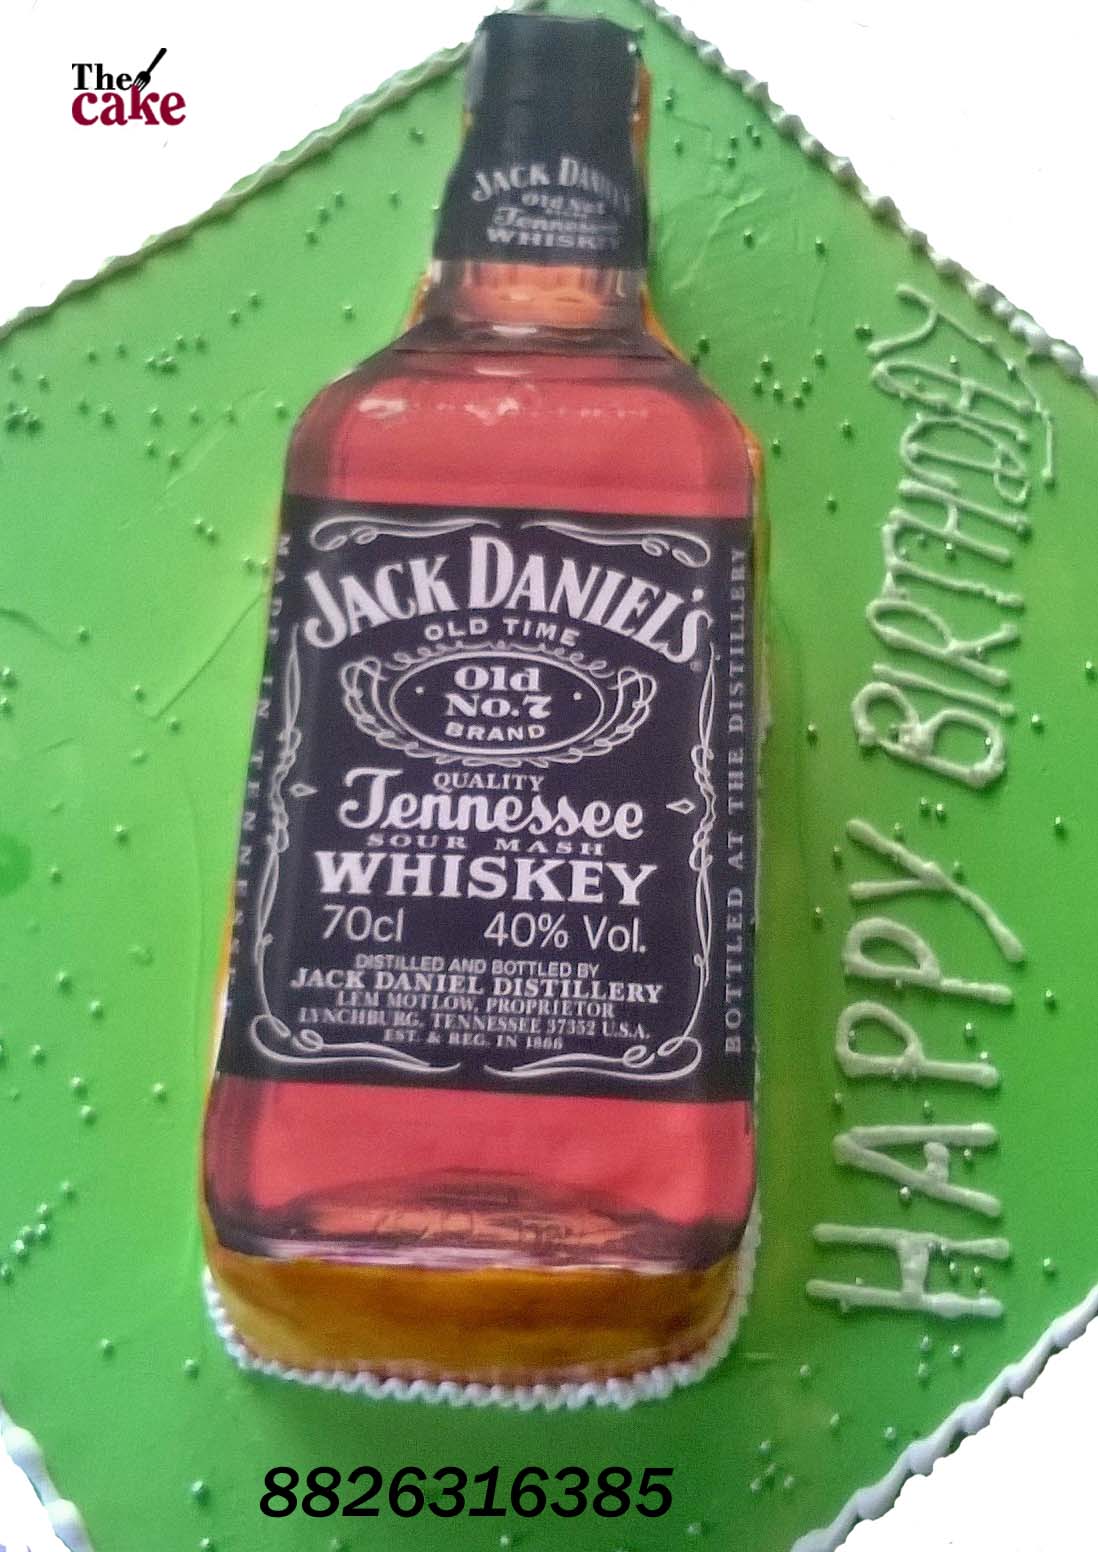 Fake whiskey miniature cake topper.... - Kaur bakery Products | Facebook